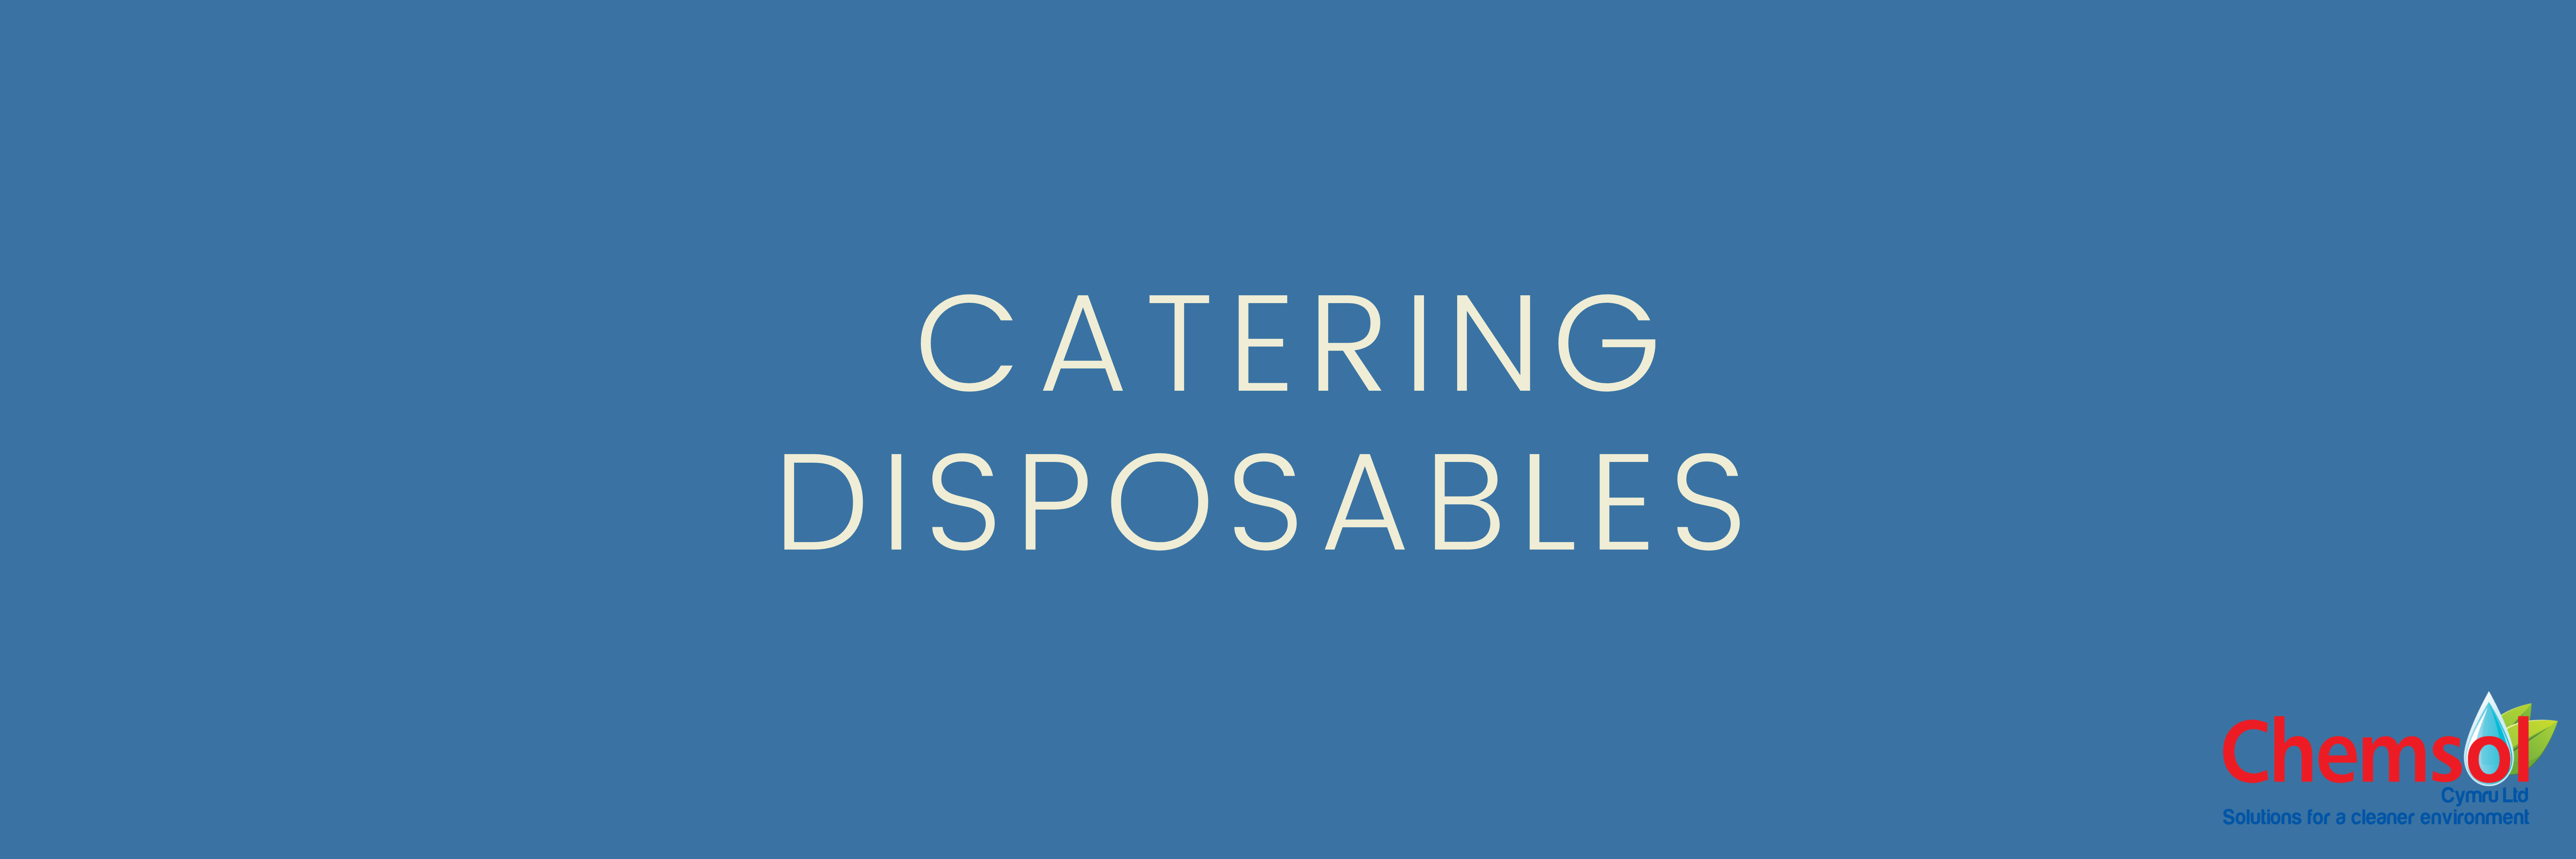 Catering Disposables